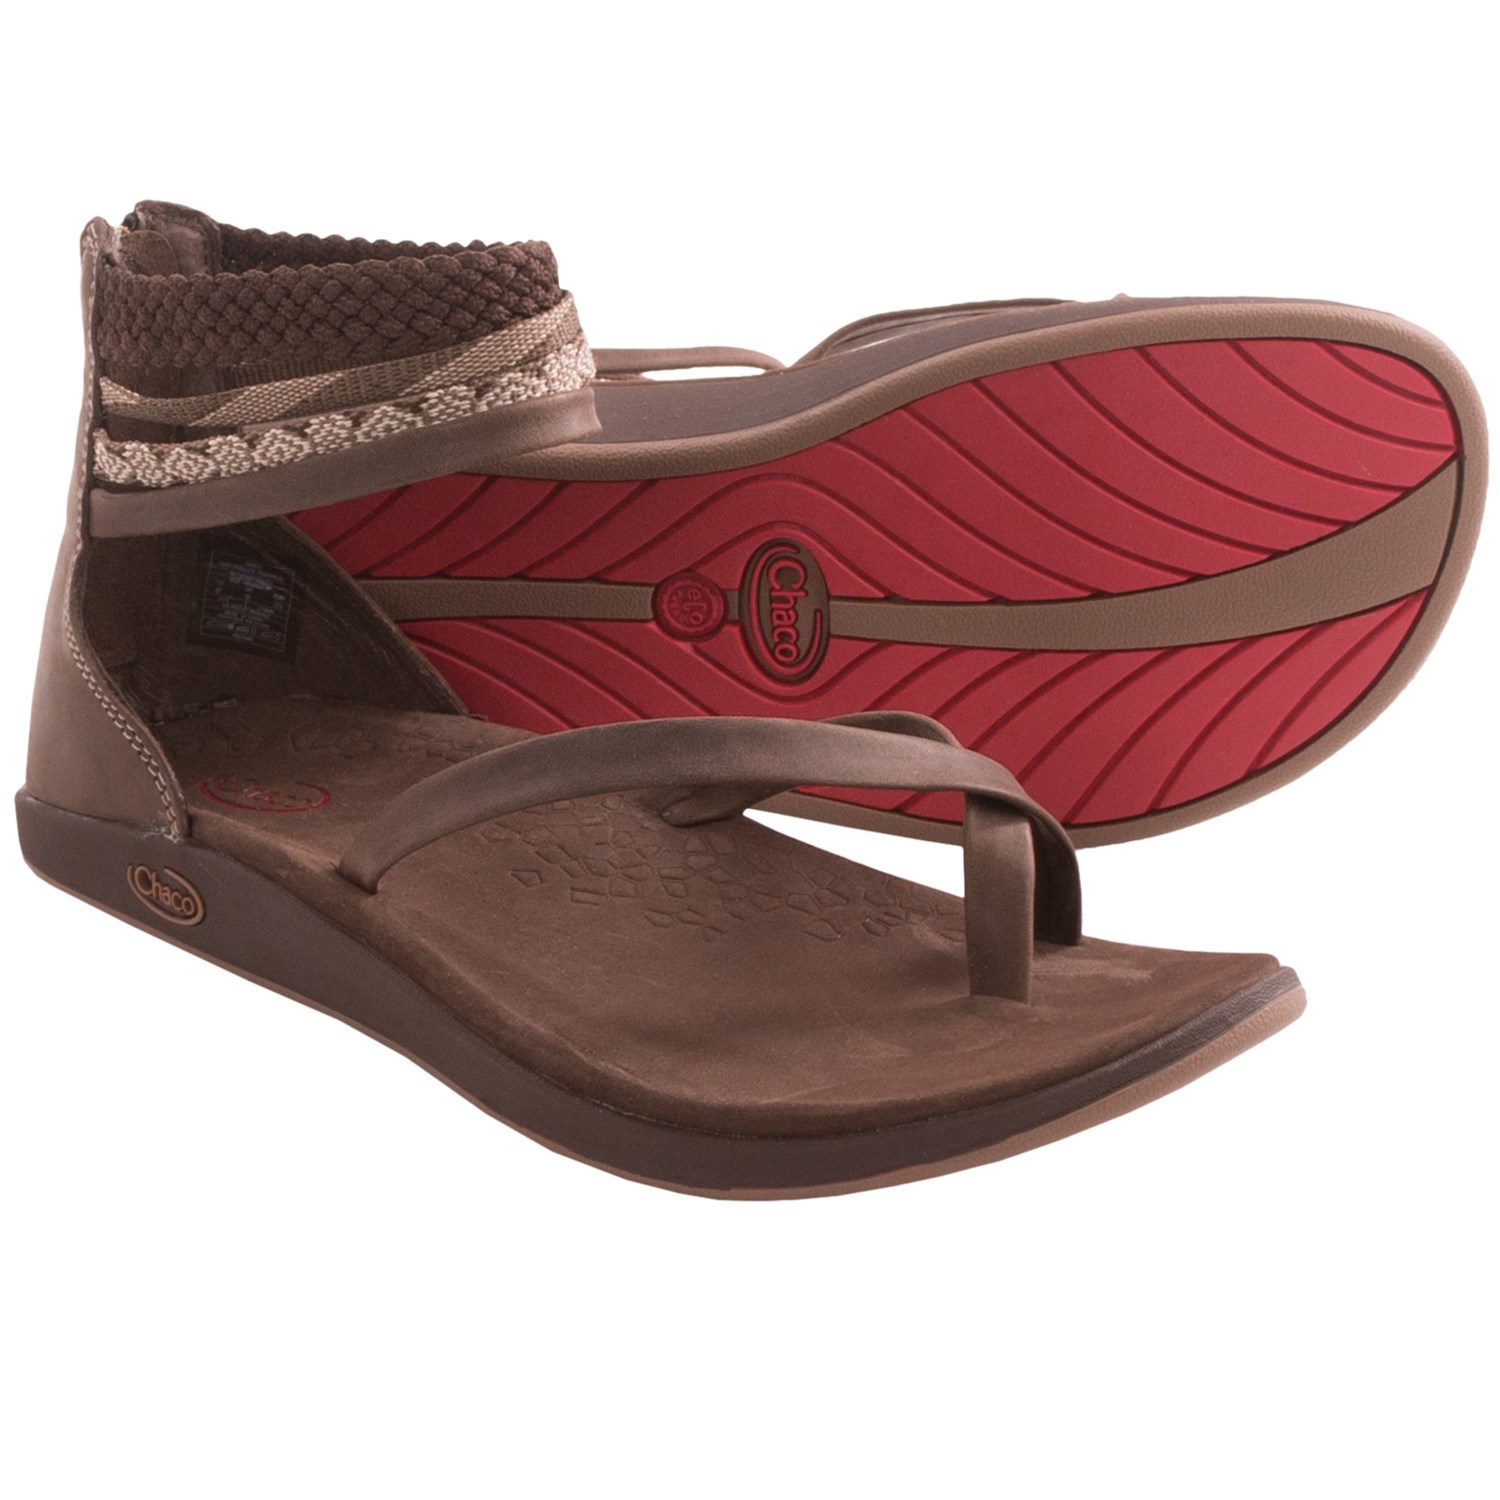 Chaco Dawkins Sandals - Leather (For Women) in Chocolate Brown